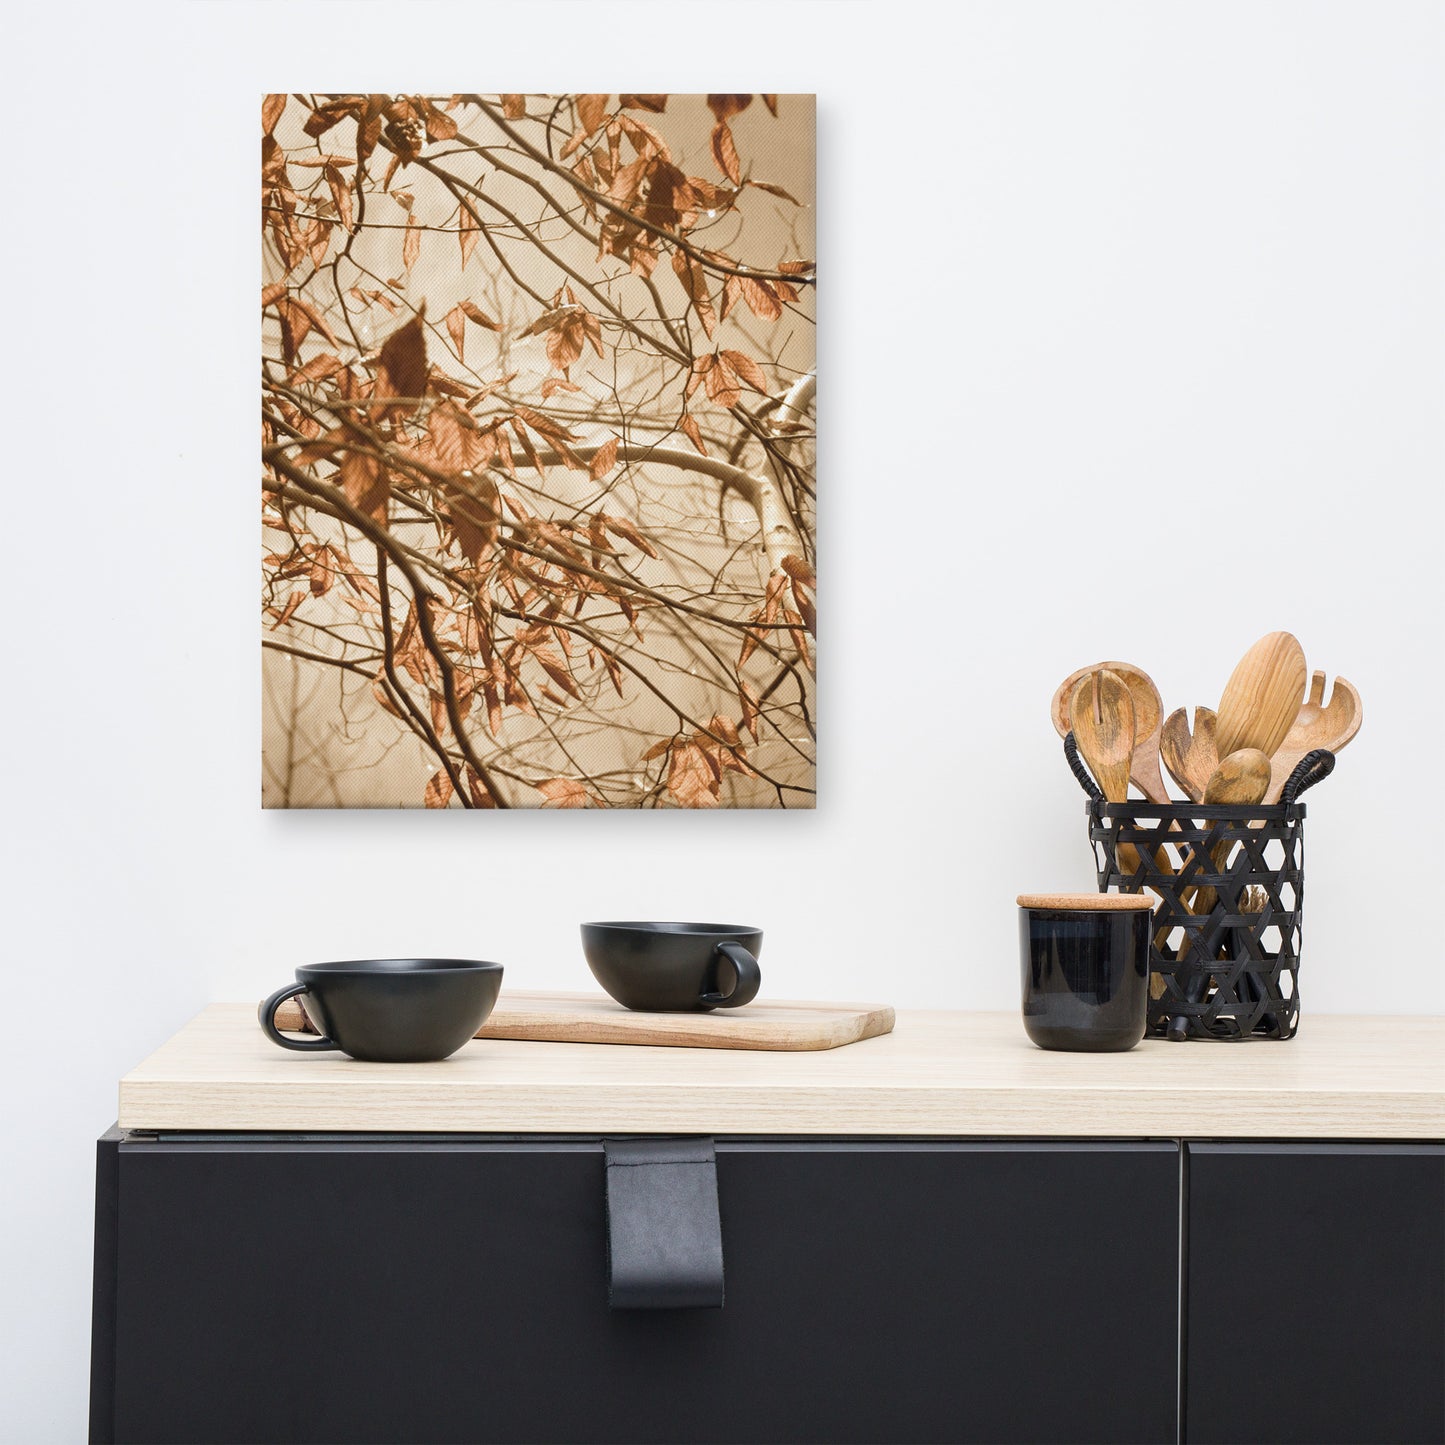 Contemporary Kitchen Wall Decor: Aged Winter Leaves Botanical / Plants Nature Photograph Canvas Wall Art Print - Artwork